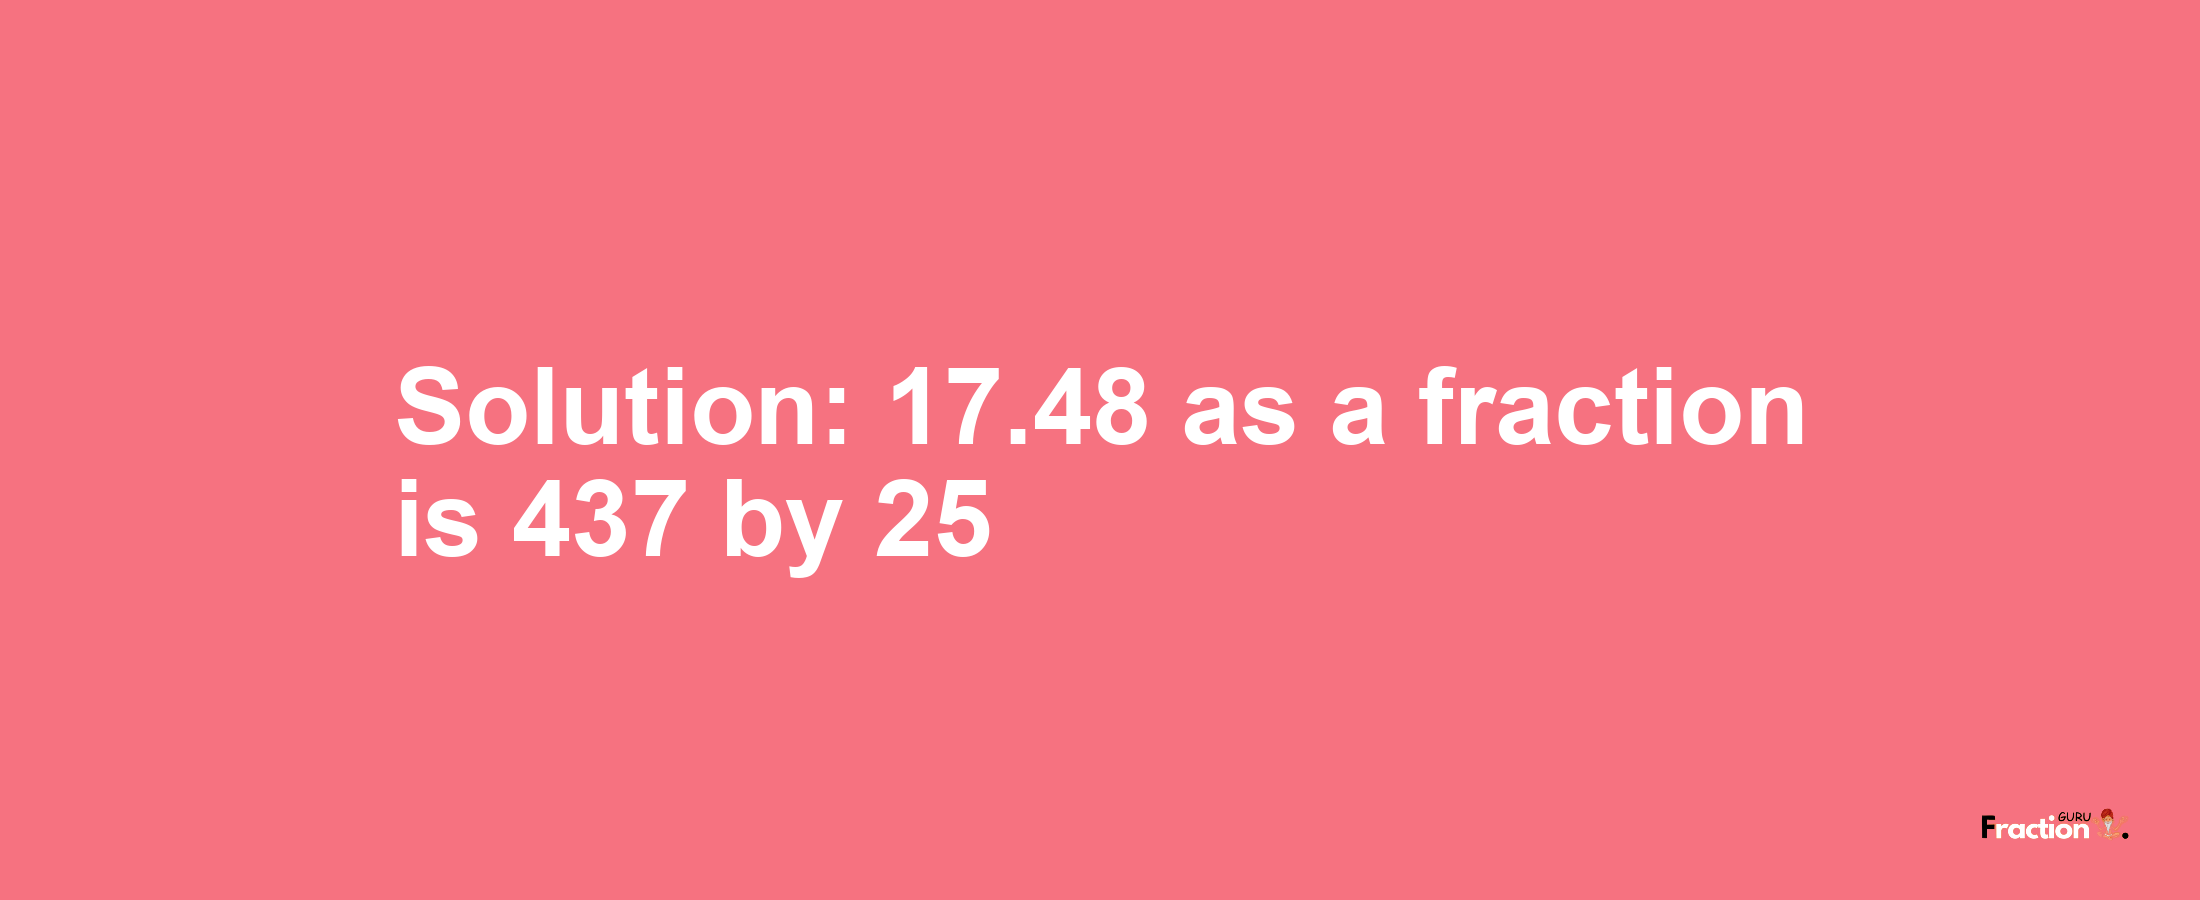 Solution:17.48 as a fraction is 437/25